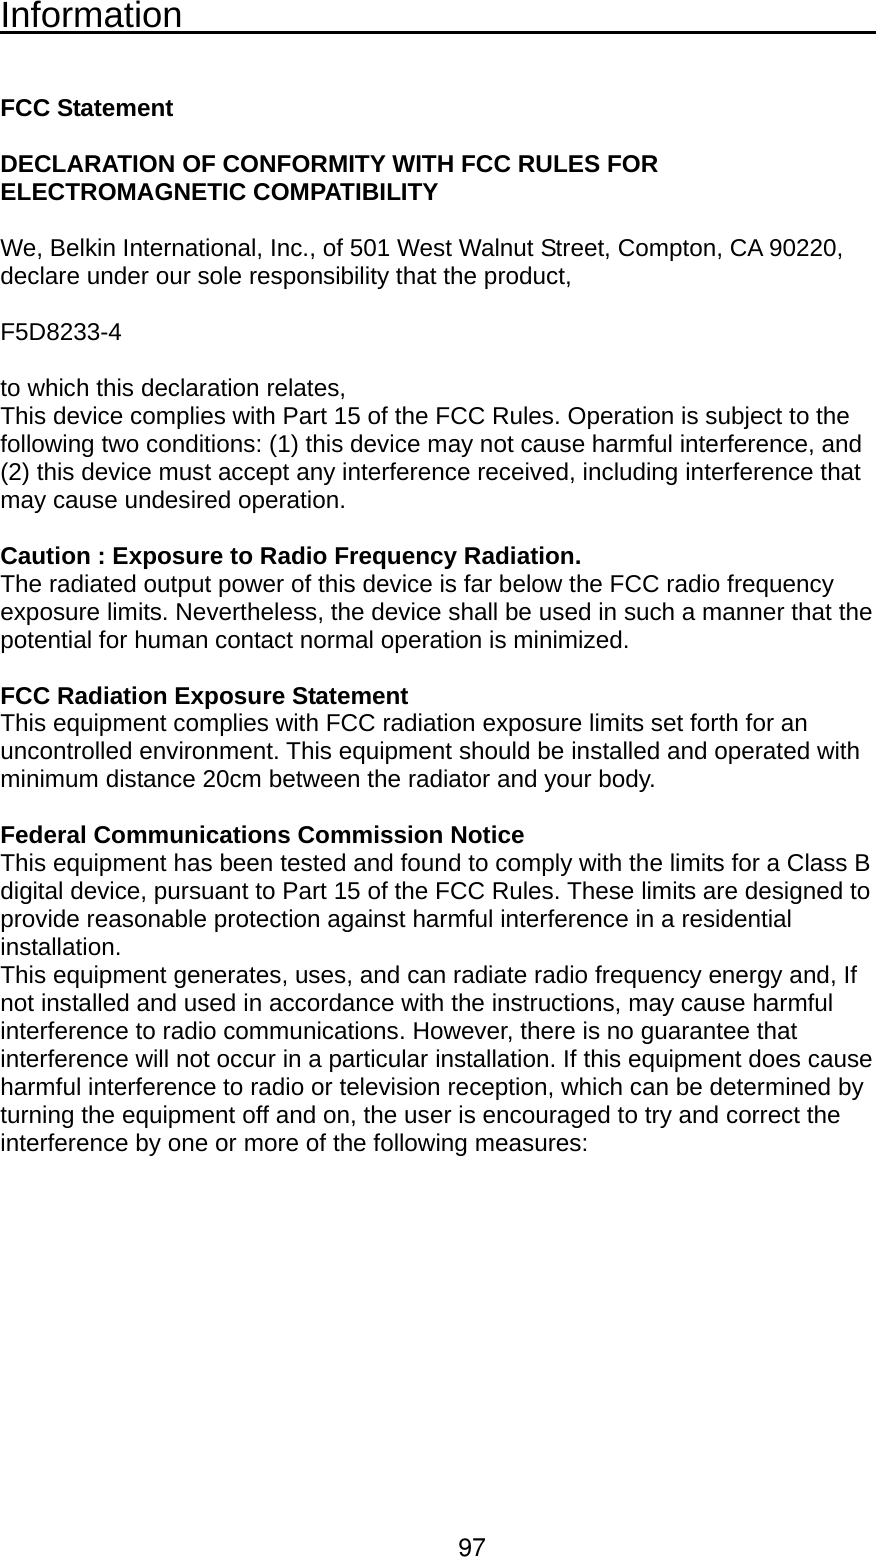 Information                                          FCC Statement  DECLARATION OF CONFORMITY WITH FCC RULES FOR ELECTROMAGNETIC COMPATIBILITY  We, Belkin International, Inc., of 501 West Walnut Street, Compton, CA 90220, declare under our sole responsibility that the product,  F5D8233-4   to which this declaration relates, This device complies with Part 15 of the FCC Rules. Operation is subject to the following two conditions: (1) this device may not cause harmful interference, and (2) this device must accept any interference received, including interference that may cause undesired operation.  Caution : Exposure to Radio Frequency Radiation. The radiated output power of this device is far below the FCC radio frequency exposure limits. Nevertheless, the device shall be used in such a manner that the potential for human contact normal operation is minimized.  FCC Radiation Exposure Statement This equipment complies with FCC radiation exposure limits set forth for an uncontrolled environment. This equipment should be installed and operated with minimum distance 20cm between the radiator and your body.  Federal Communications Commission Notice This equipment has been tested and found to comply with the limits for a Class B digital device, pursuant to Part 15 of the FCC Rules. These limits are designed to provide reasonable protection against harmful interference in a residential installation. This equipment generates, uses, and can radiate radio frequency energy and, If not installed and used in accordance with the instructions, may cause harmful interference to radio communications. However, there is no guarantee that interference will not occur in a particular installation. If this equipment does cause harmful interference to radio or television reception, which can be determined by turning the equipment off and on, the user is encouraged to try and correct the interference by one or more of the following measures:97